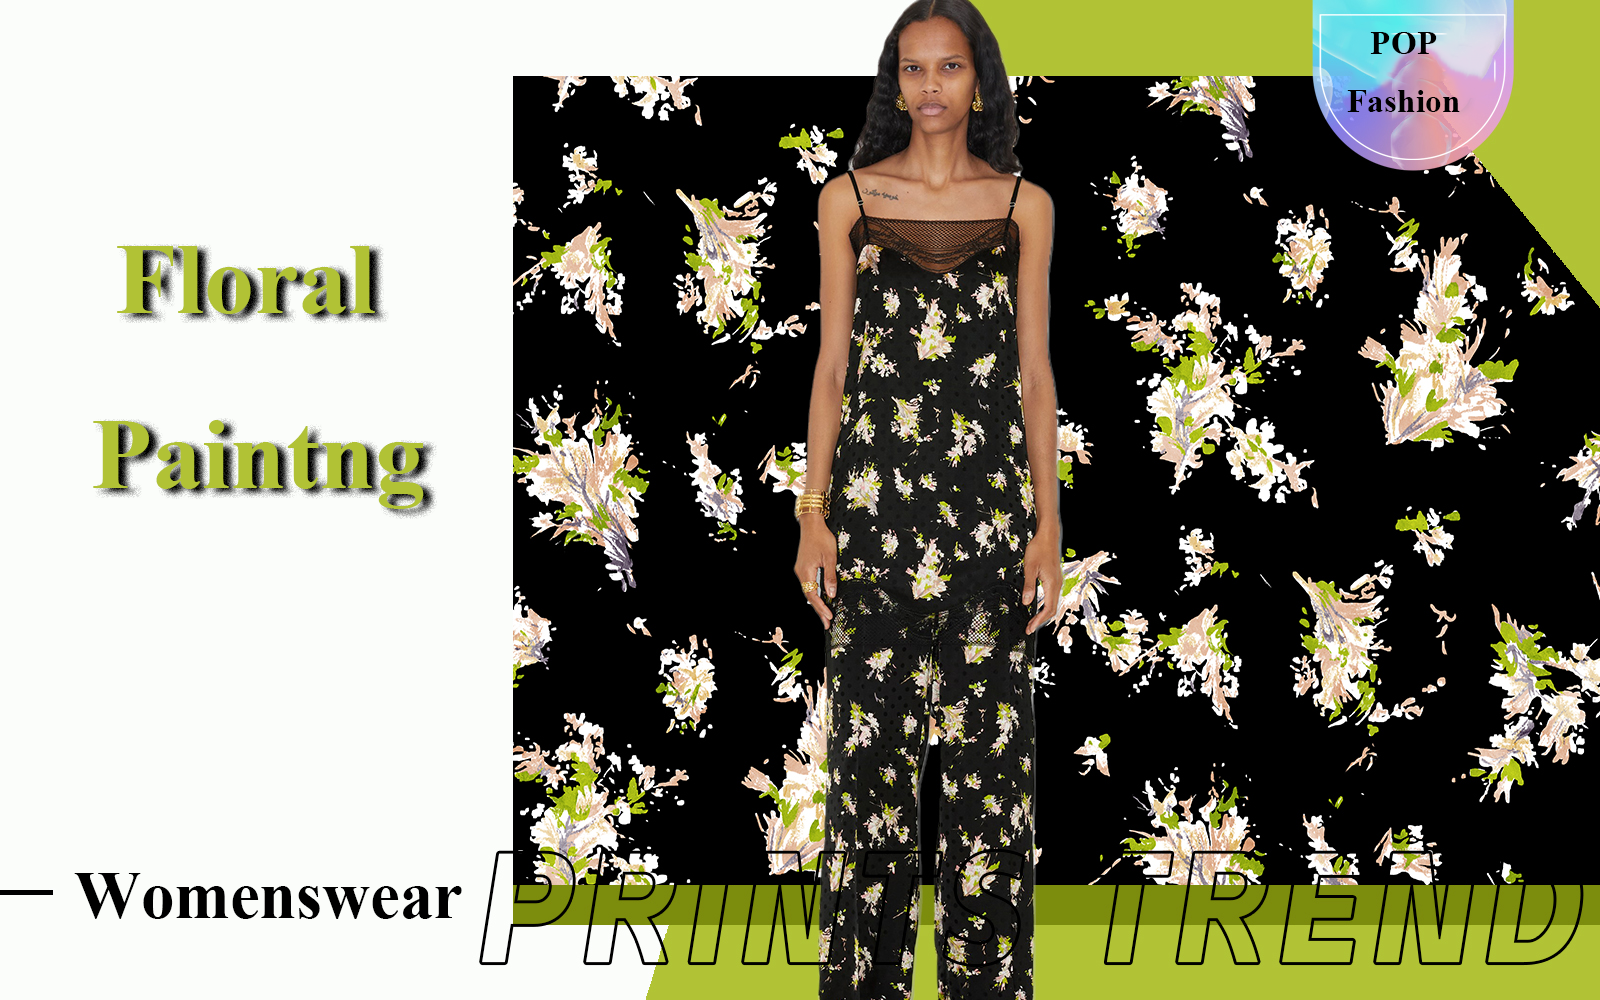 Floral Painting -- The Pattern Trend for Womenswear